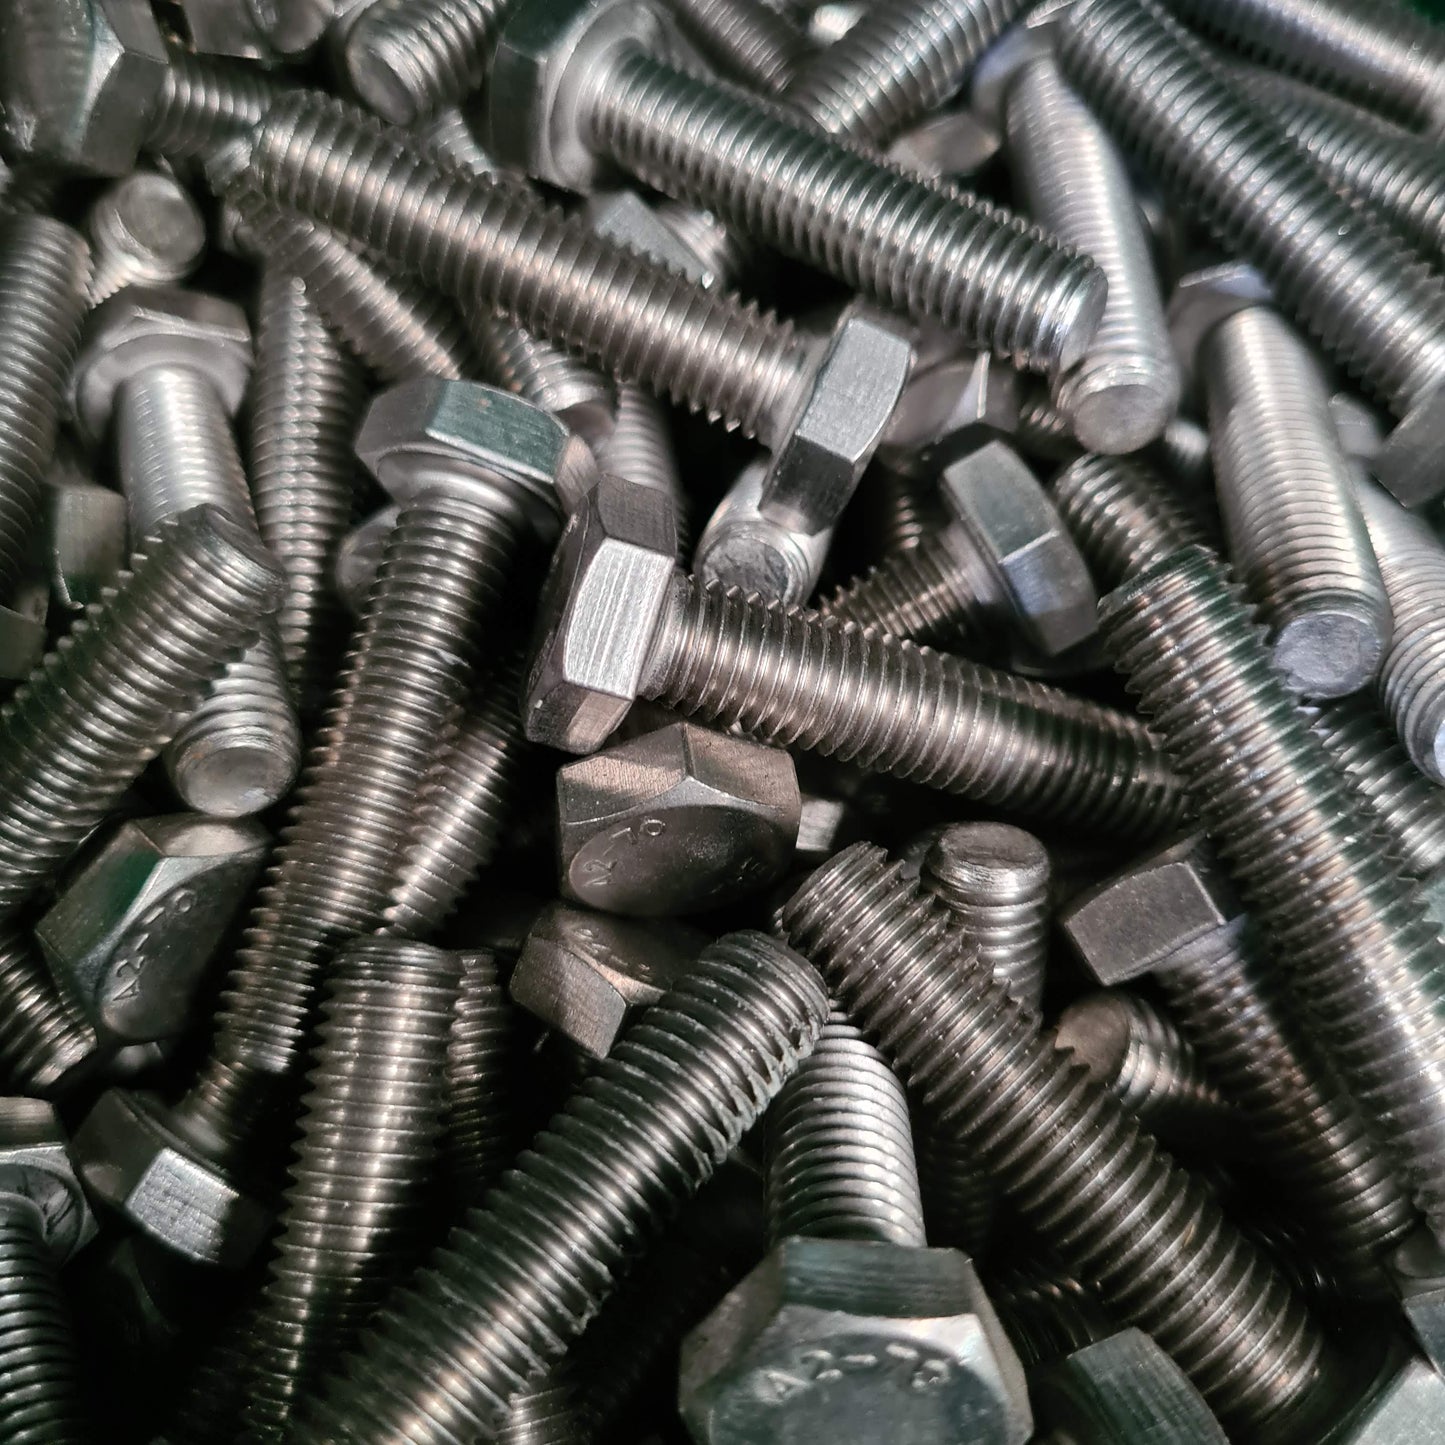 M4 Set Screw available in 316 or 304 stainless steel and lengths from 8mm to 40mm